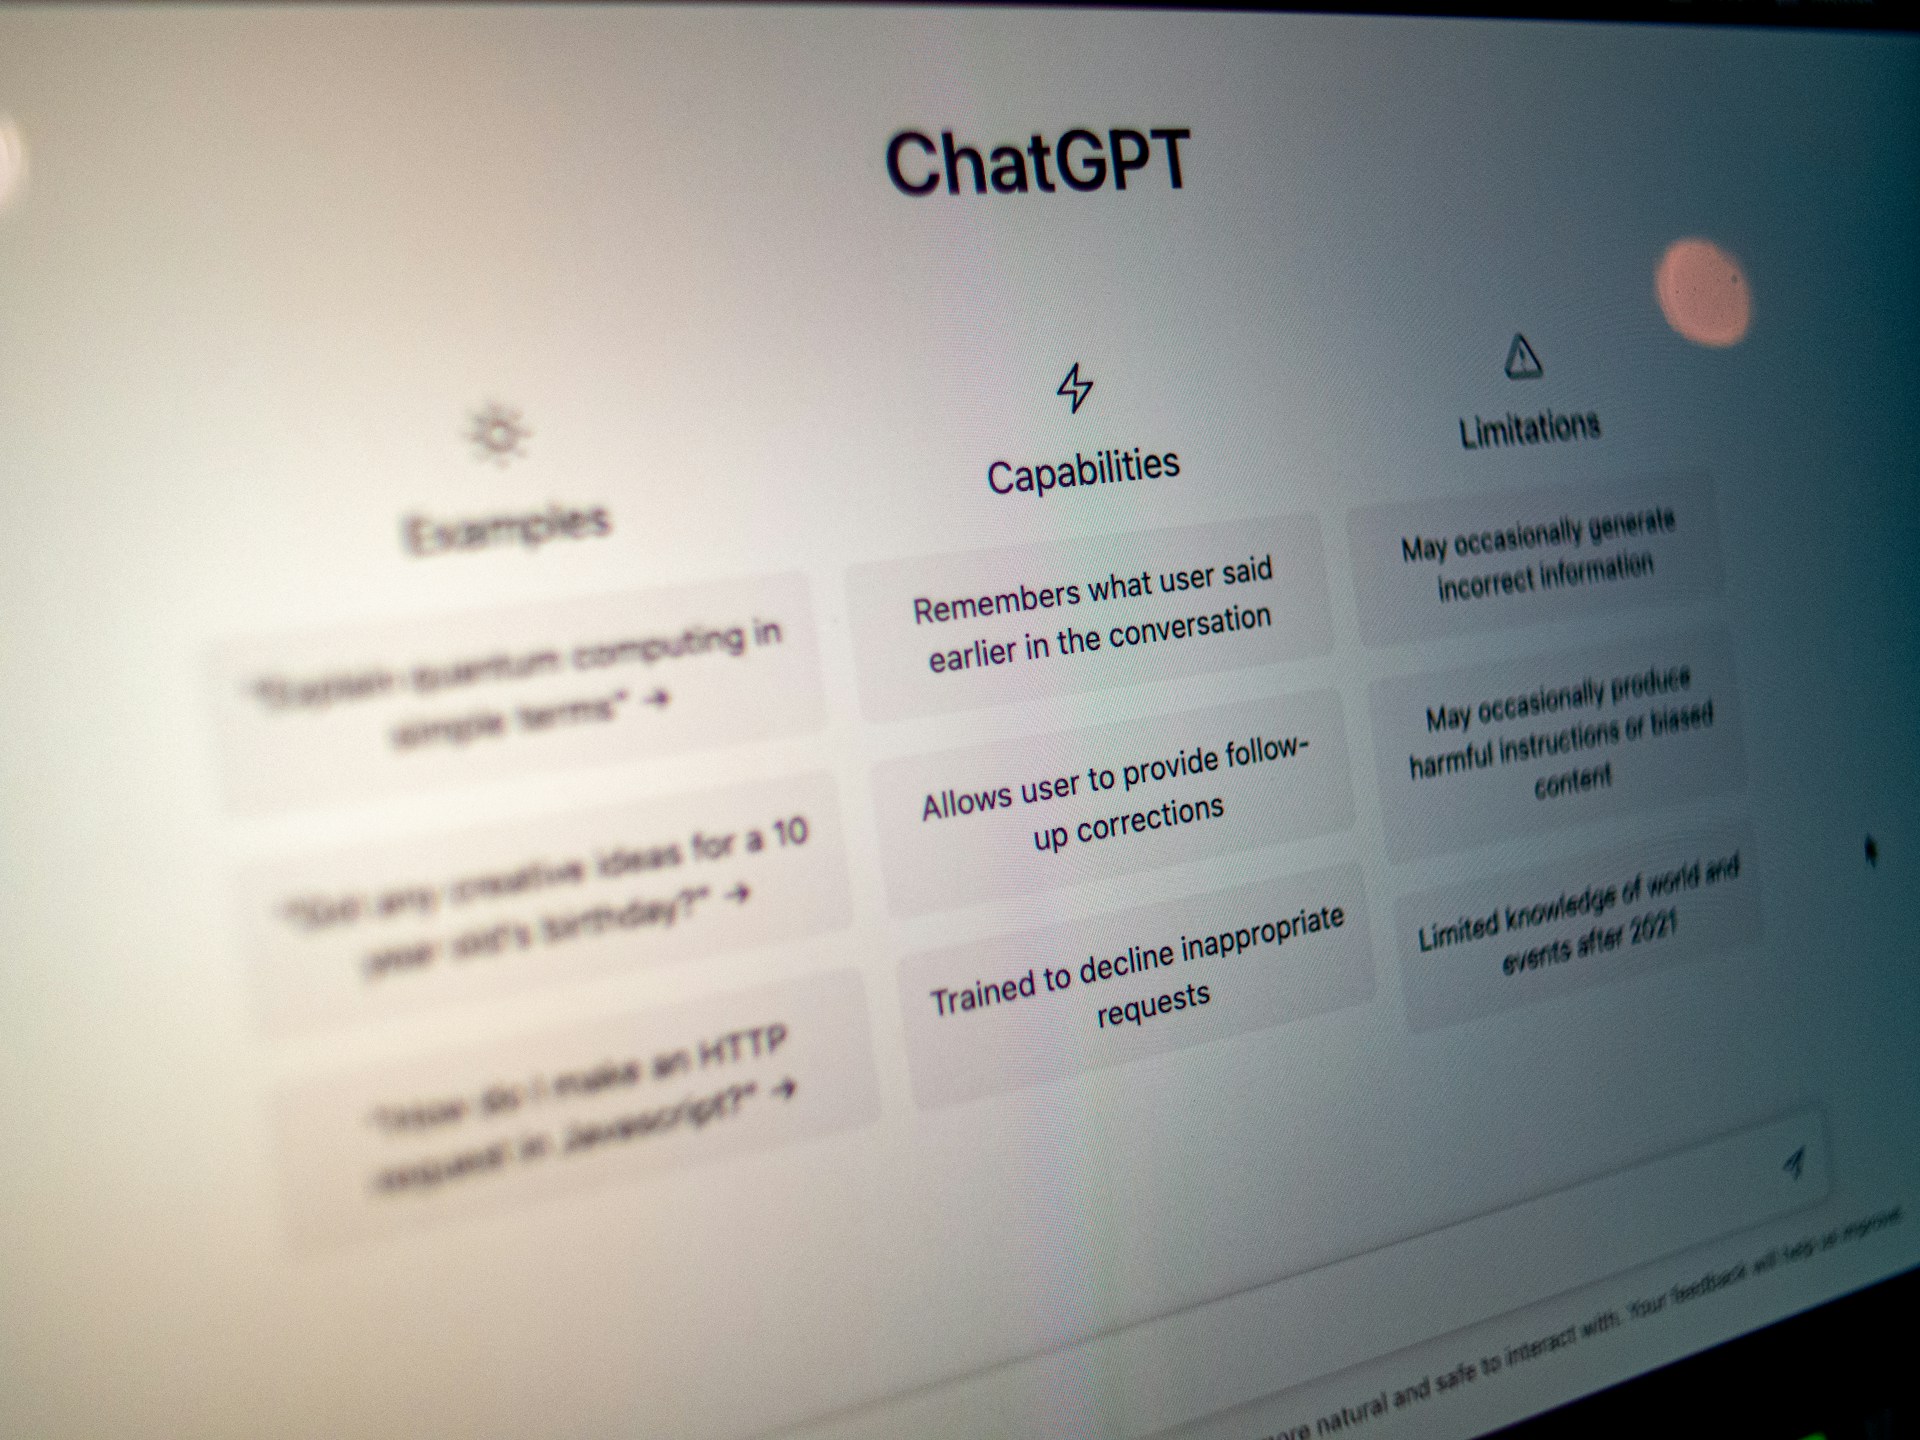 The power of ChatGPT: A guide for social media managers